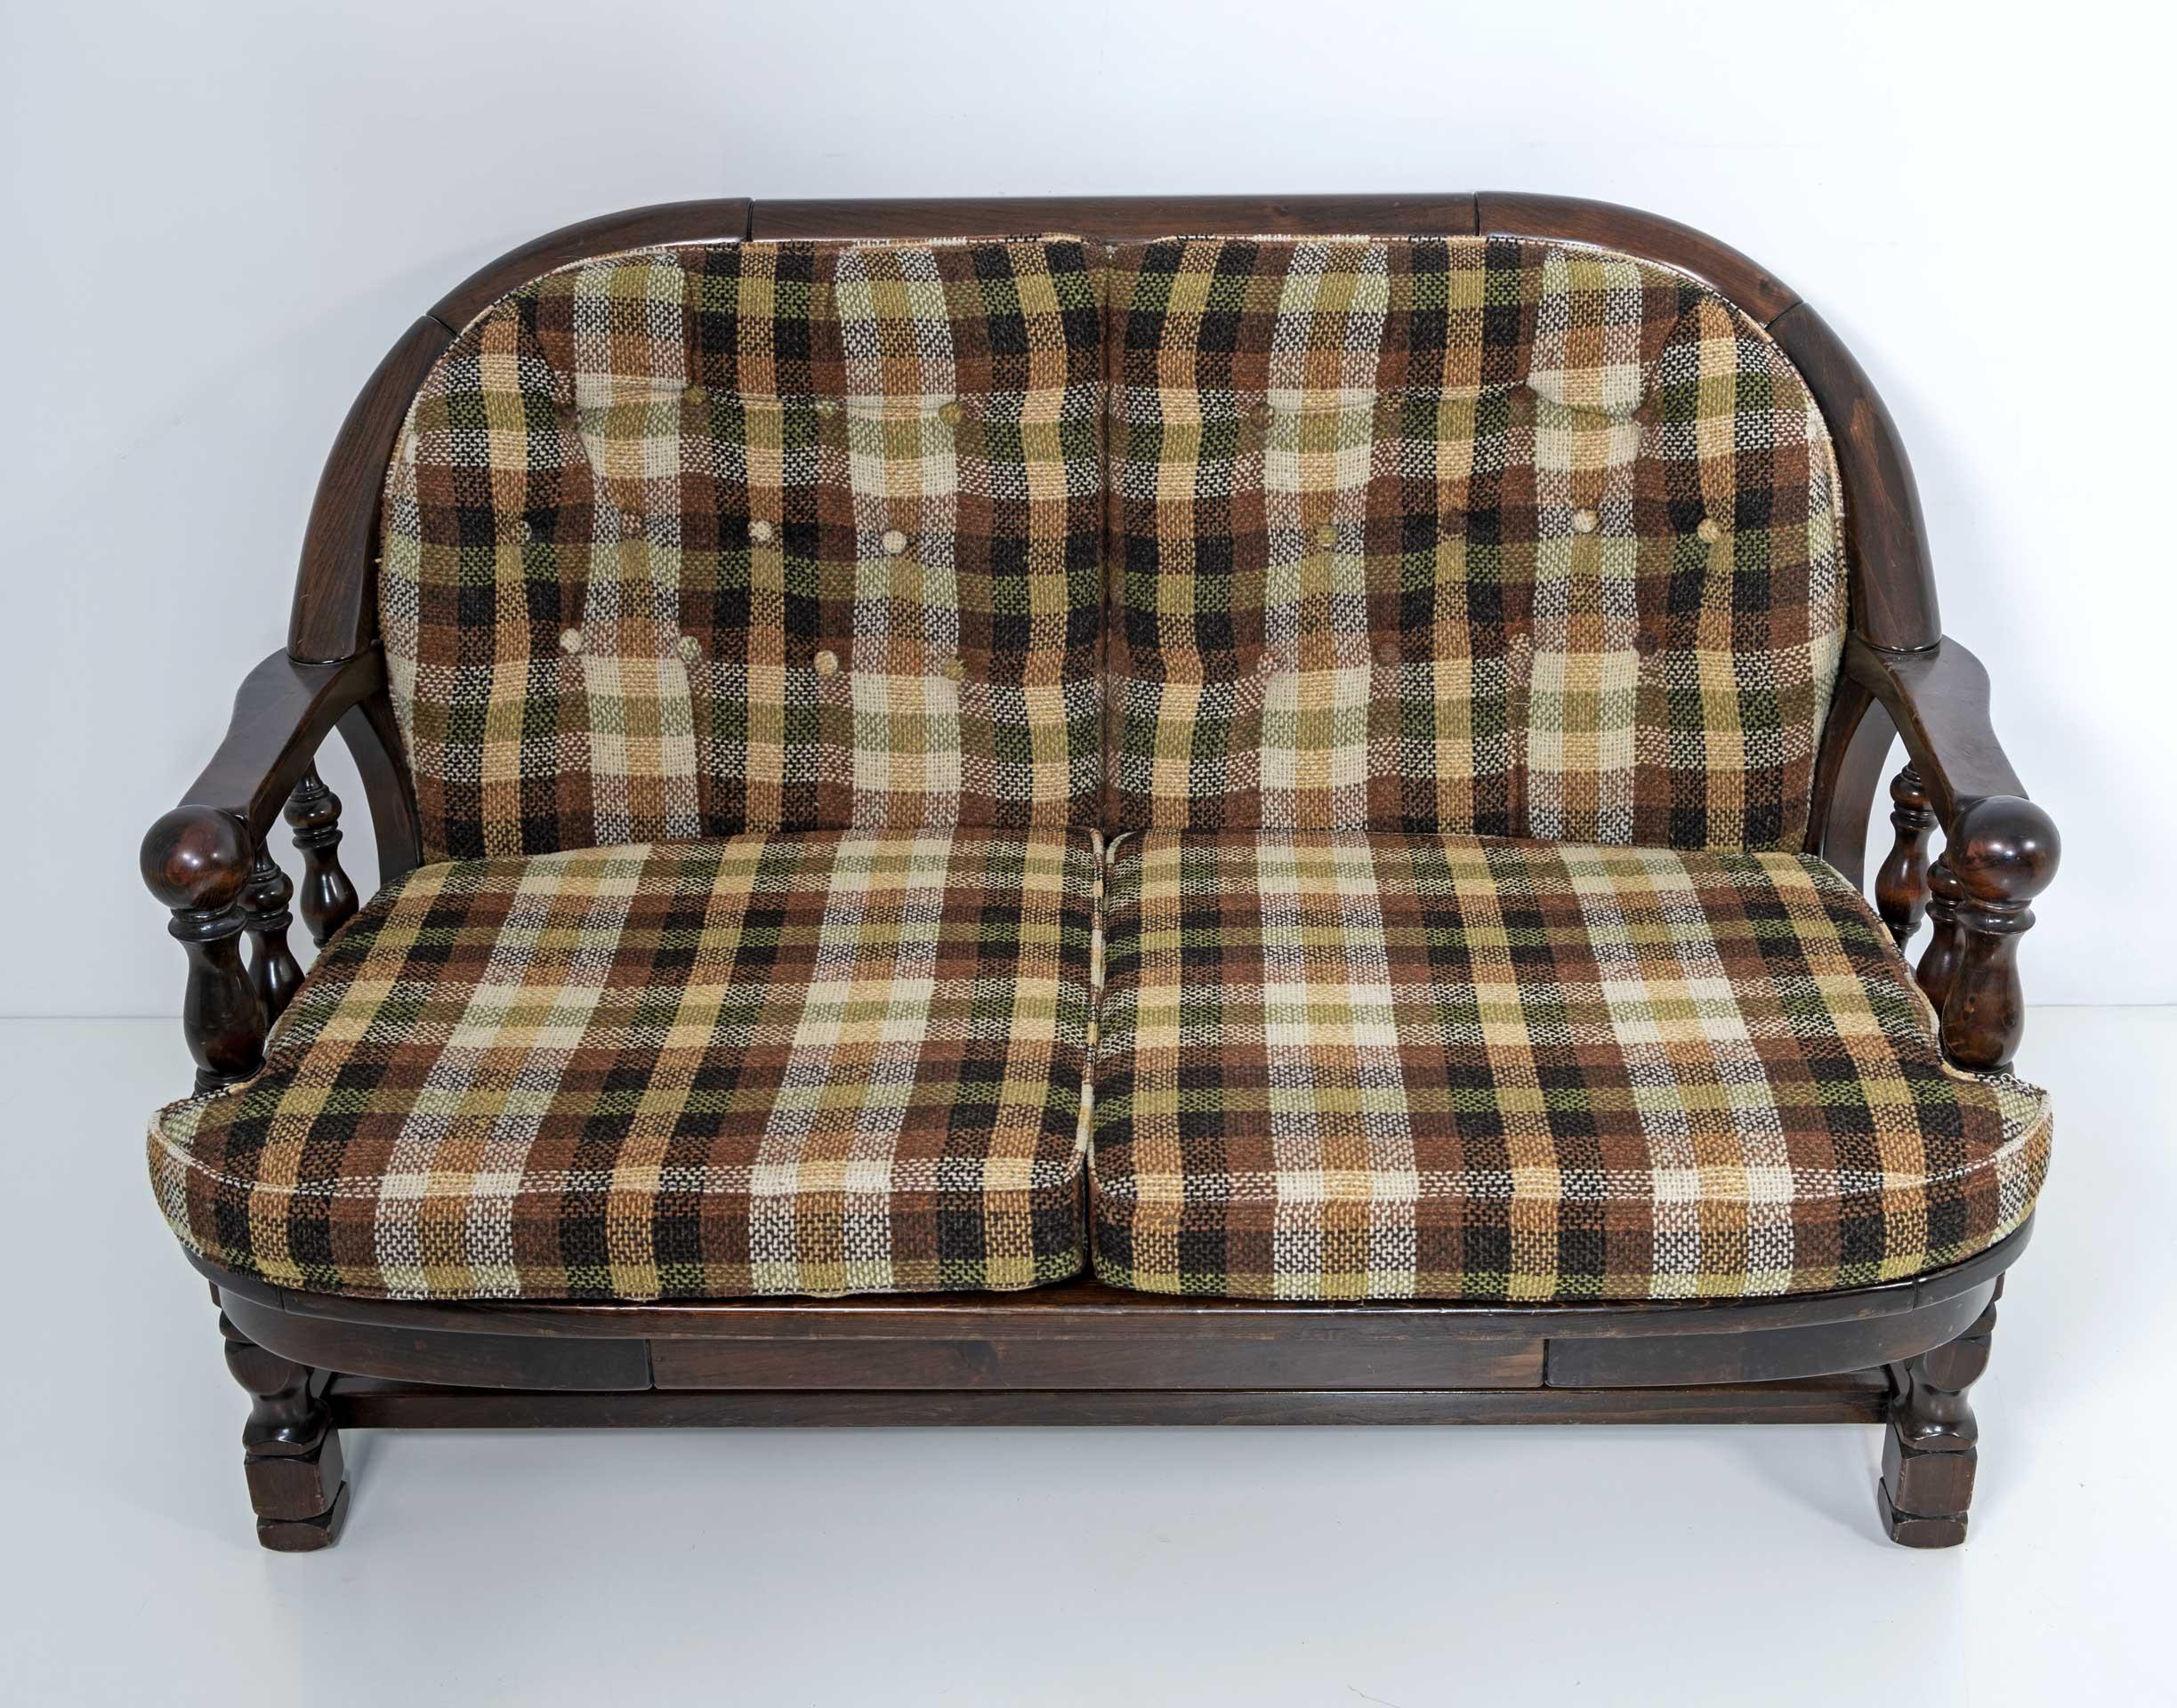 Late 20th Century Mid-Century Modern Italian Walnut and Fabric Country Sofa by Pizzetti Roma, 70s For Sale